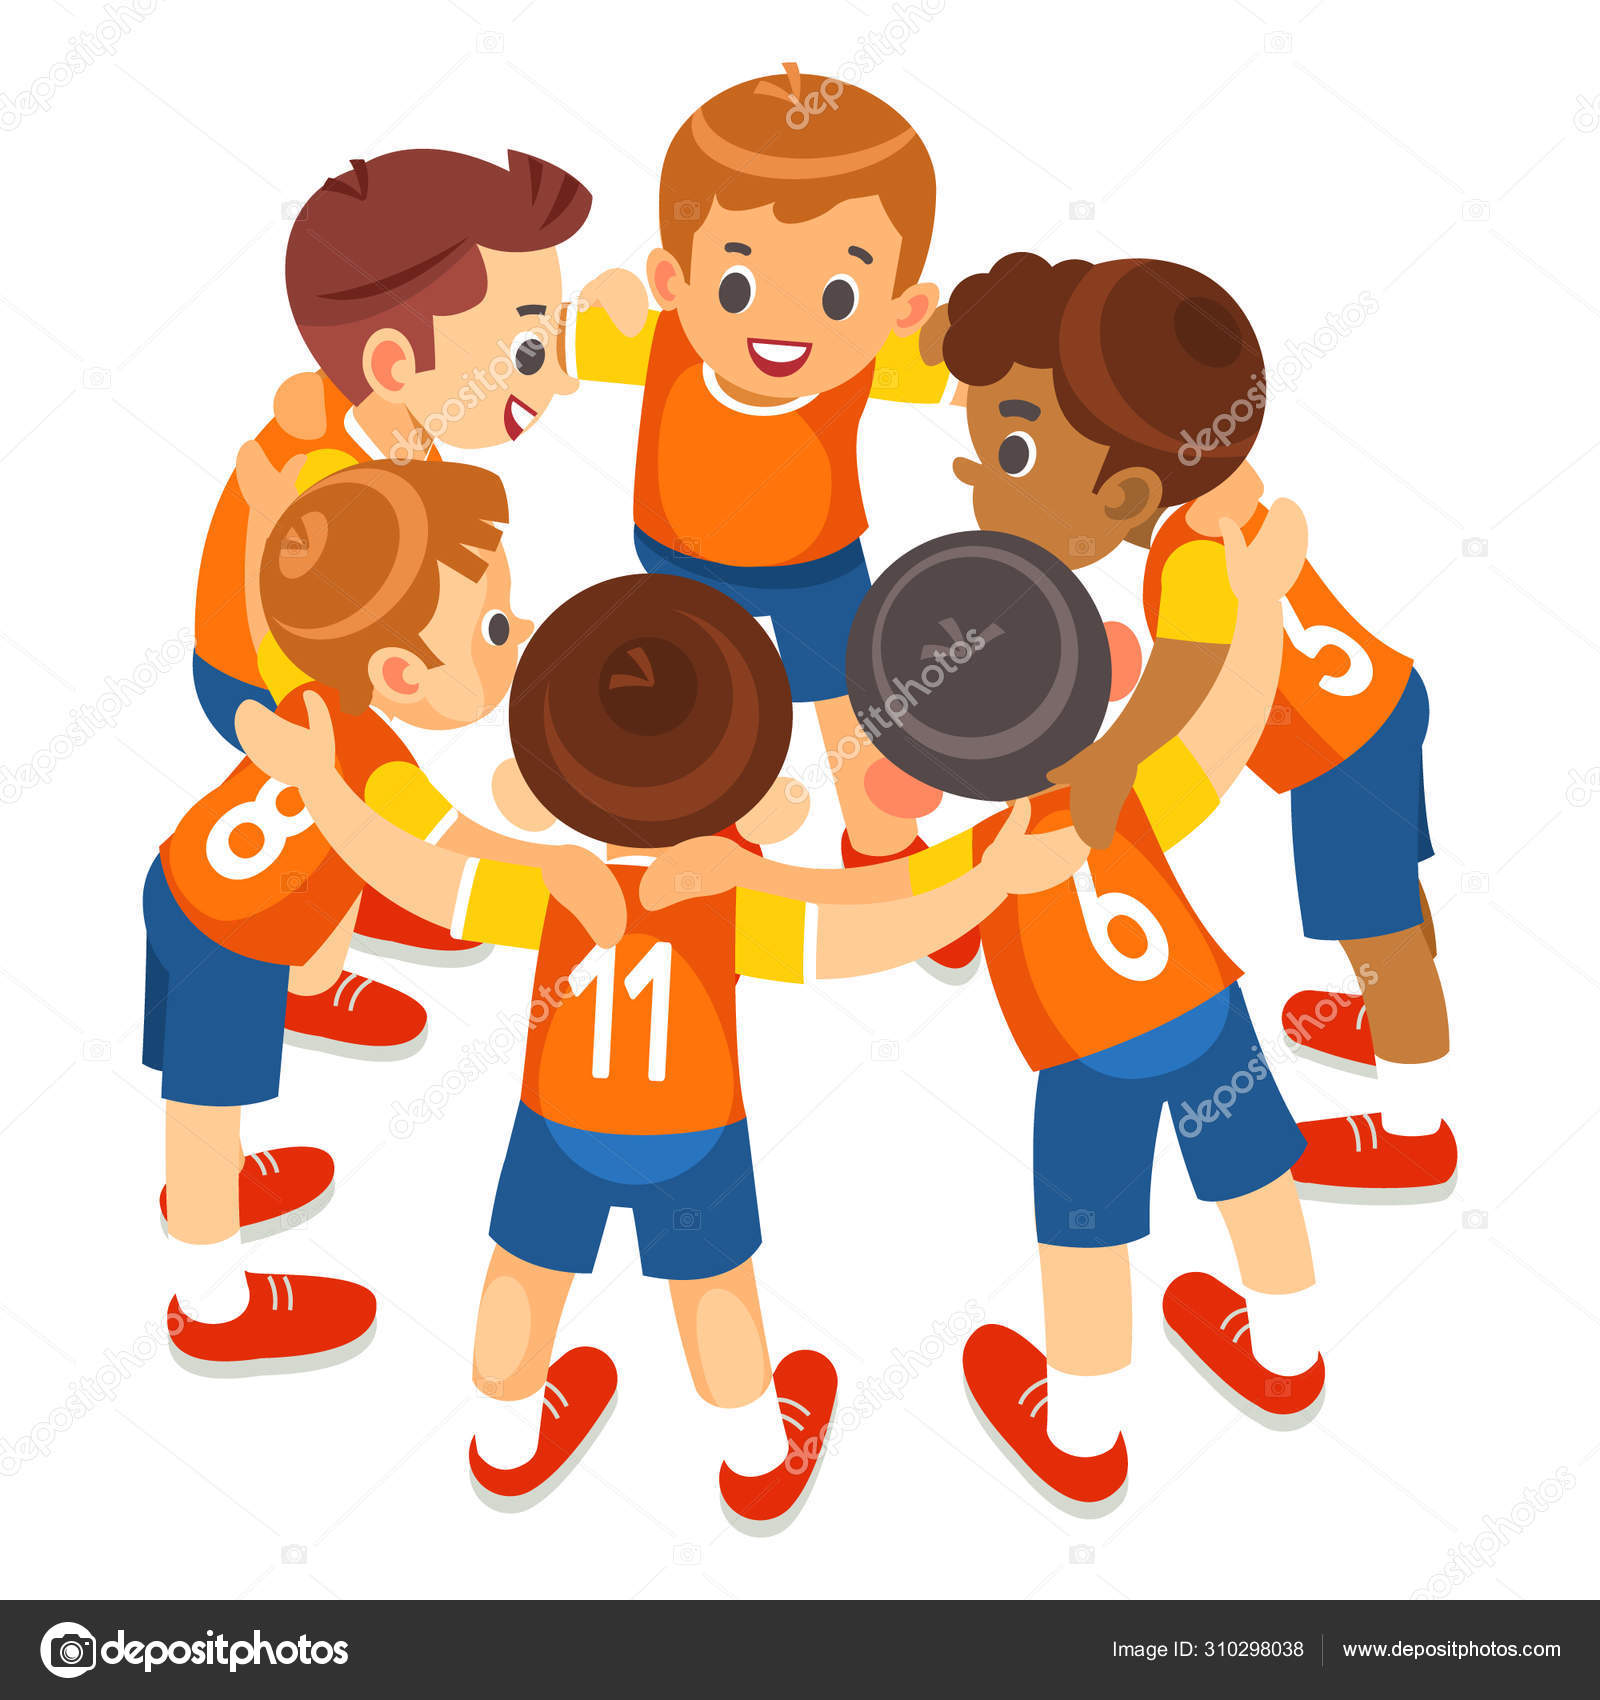 Young Boys Sports Team On Stadium Vector Image By C Bahauaddinbek Vector Stock 310298038